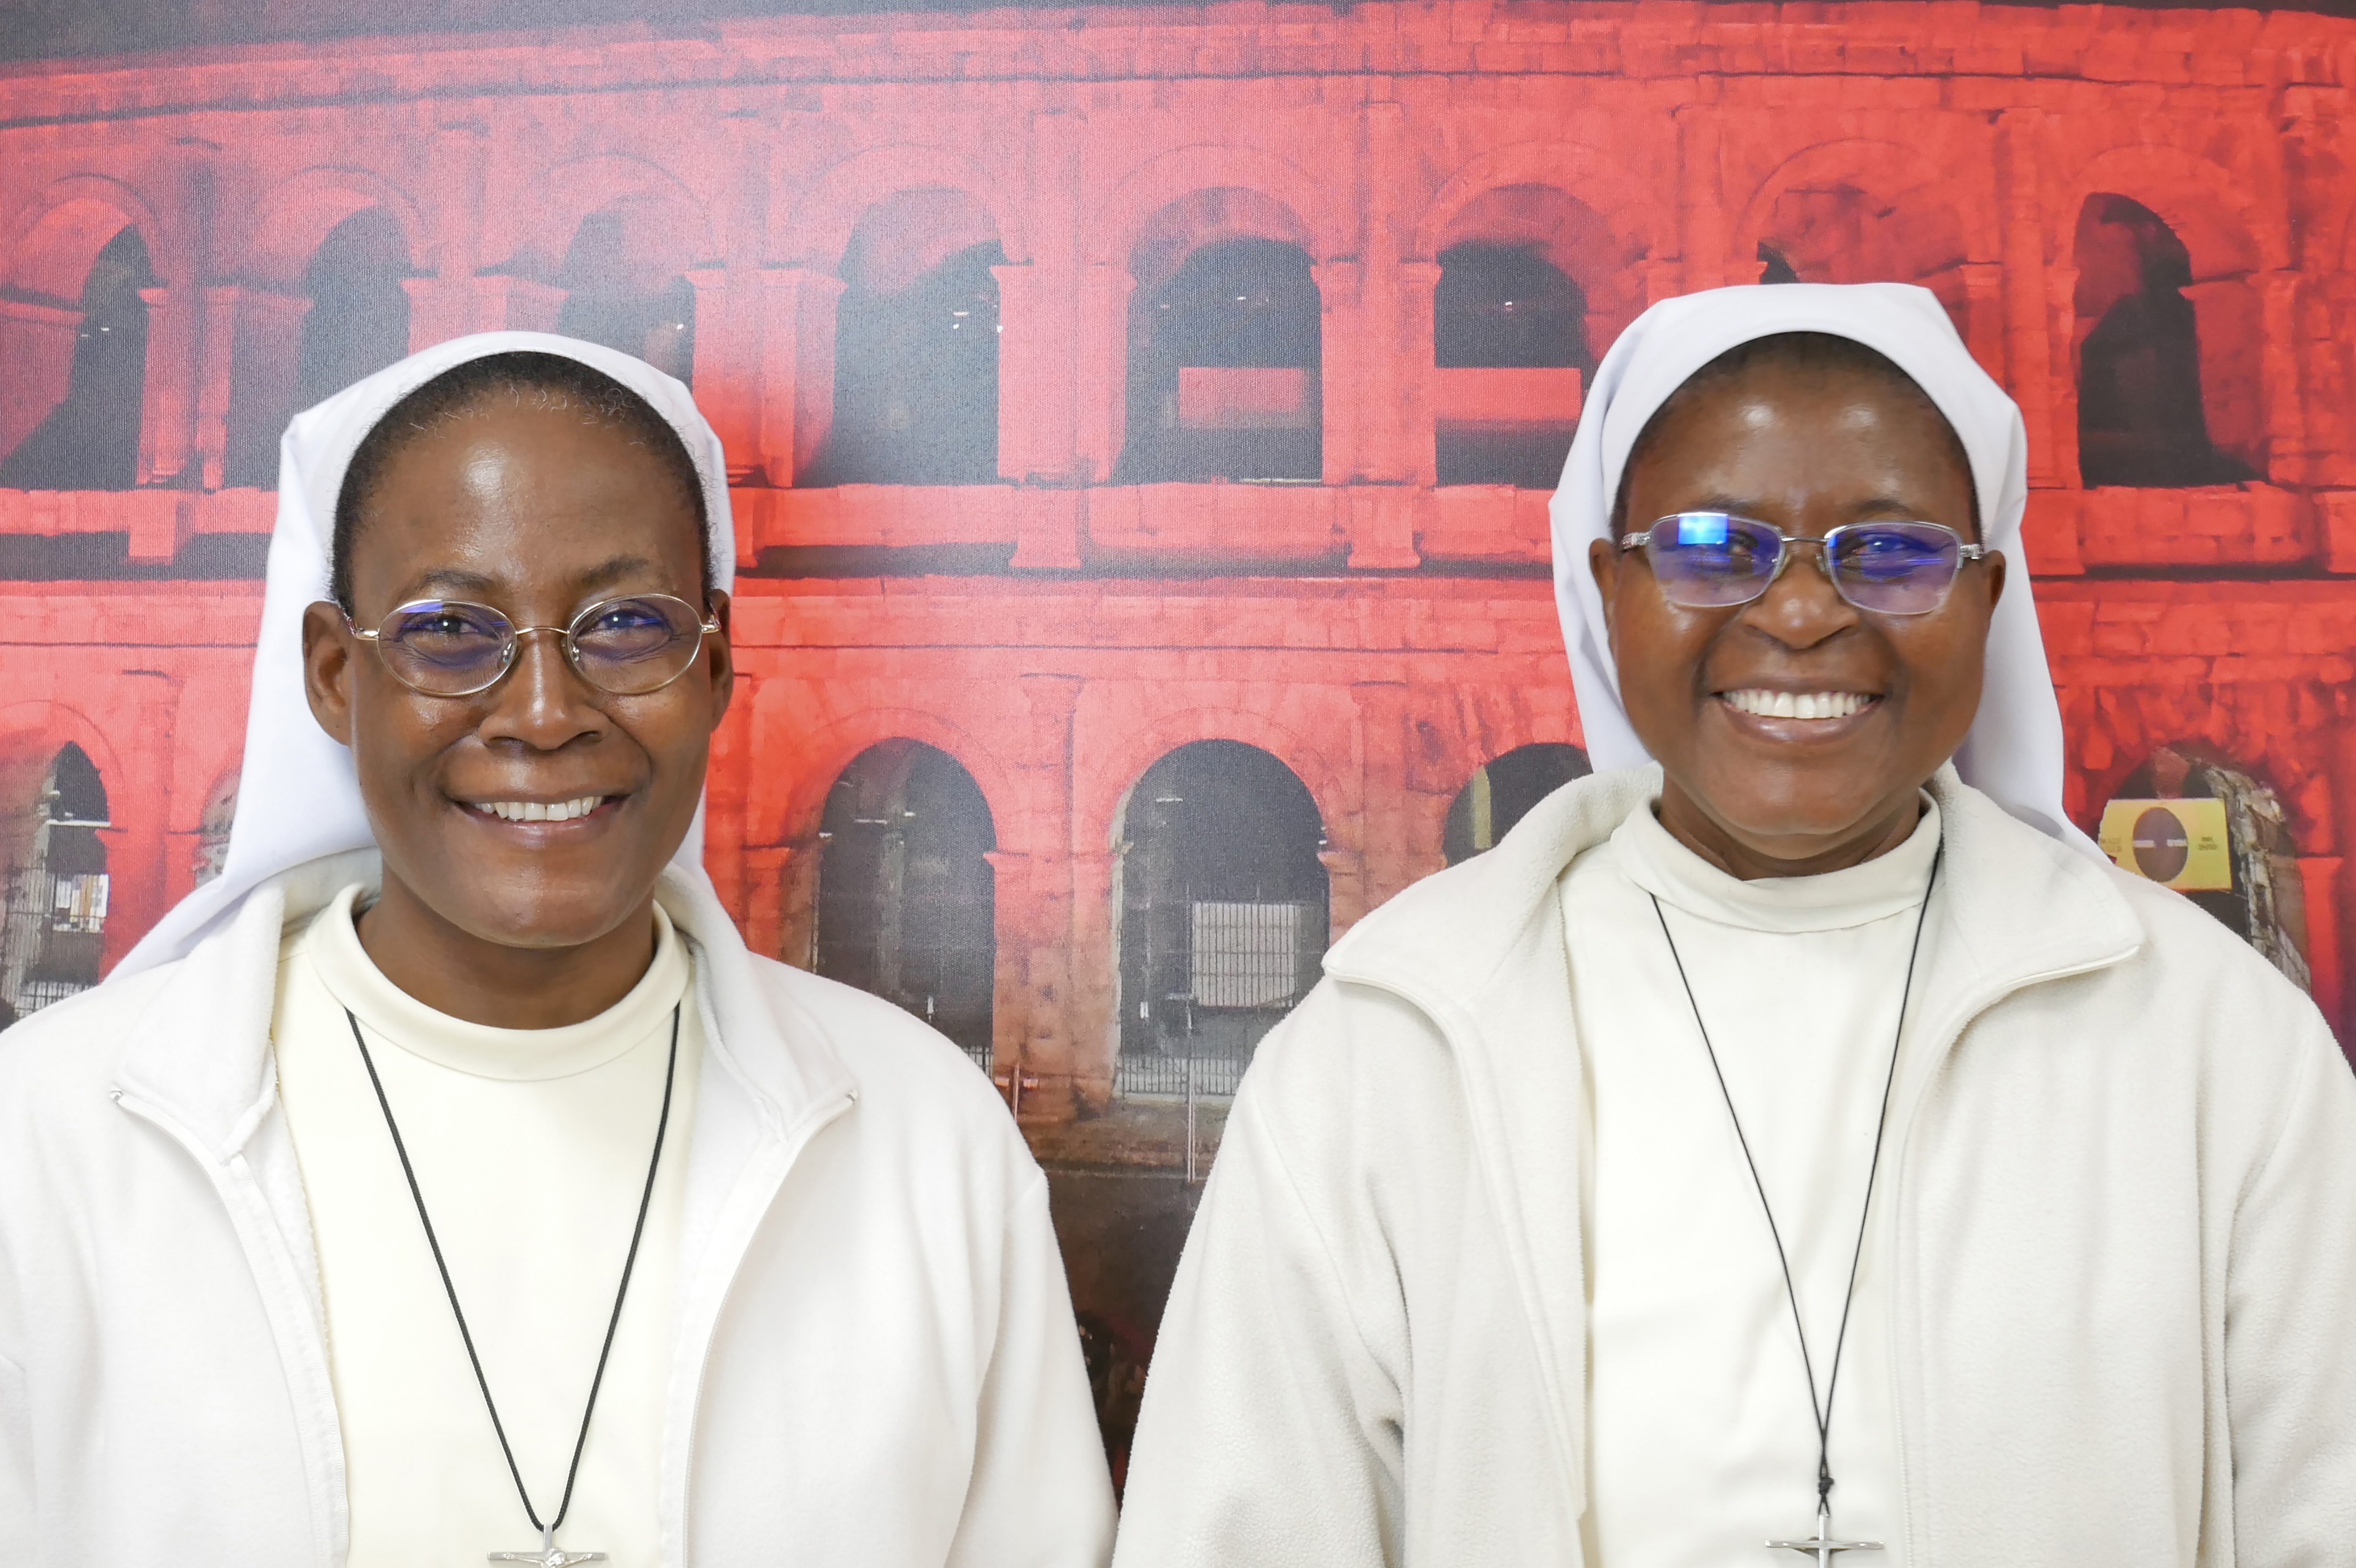 Images: (Left to right) Sister Pauline and Sister Marie Bernadette (Credit: Aid to the Church in Need)